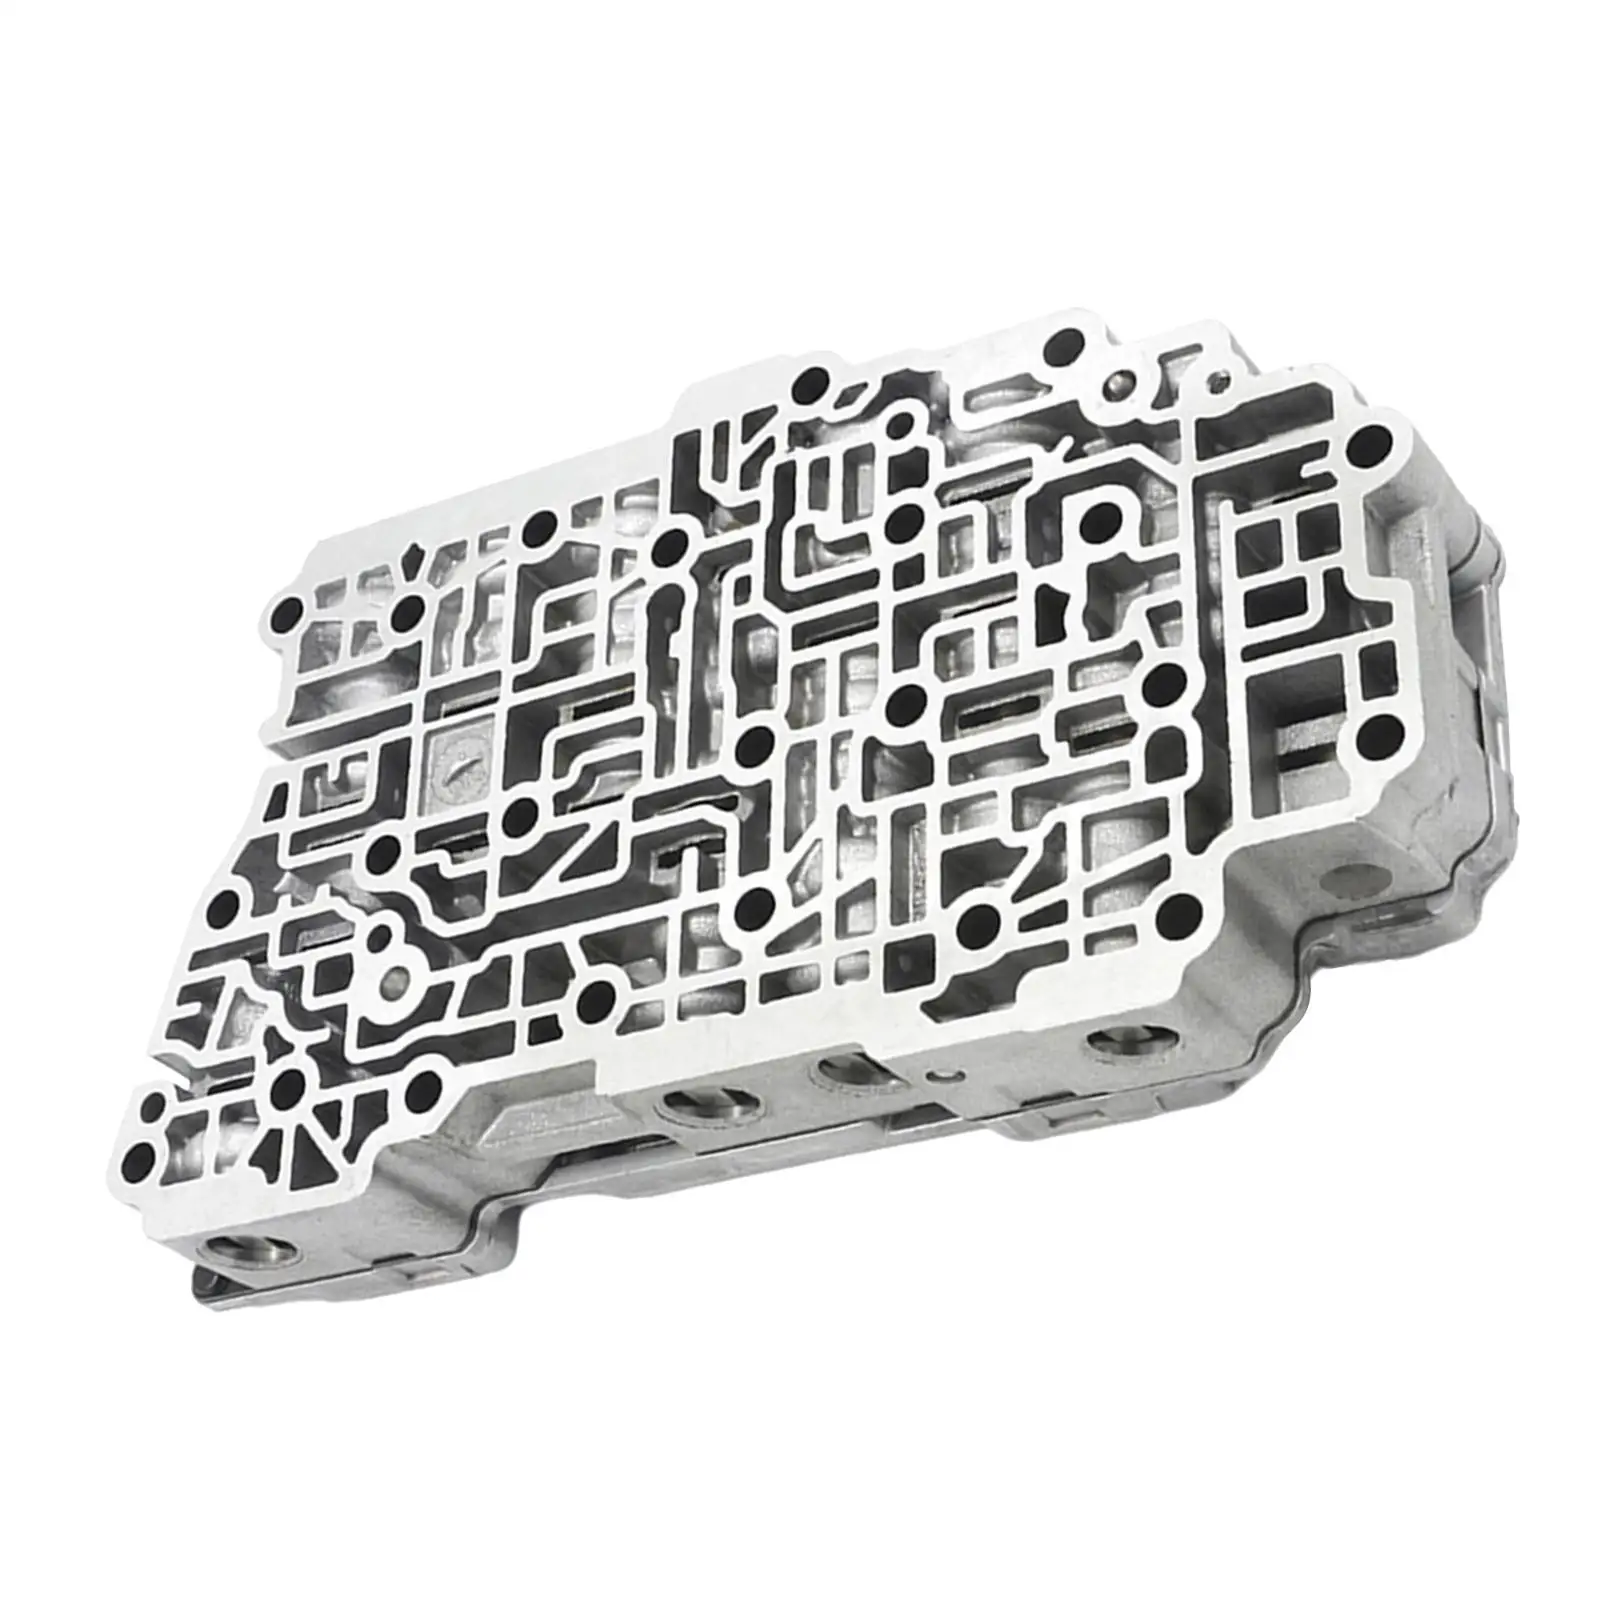 Car Transmission Valve Body Control Module Replacement for     Orlando Made of high reliable quality and durable material